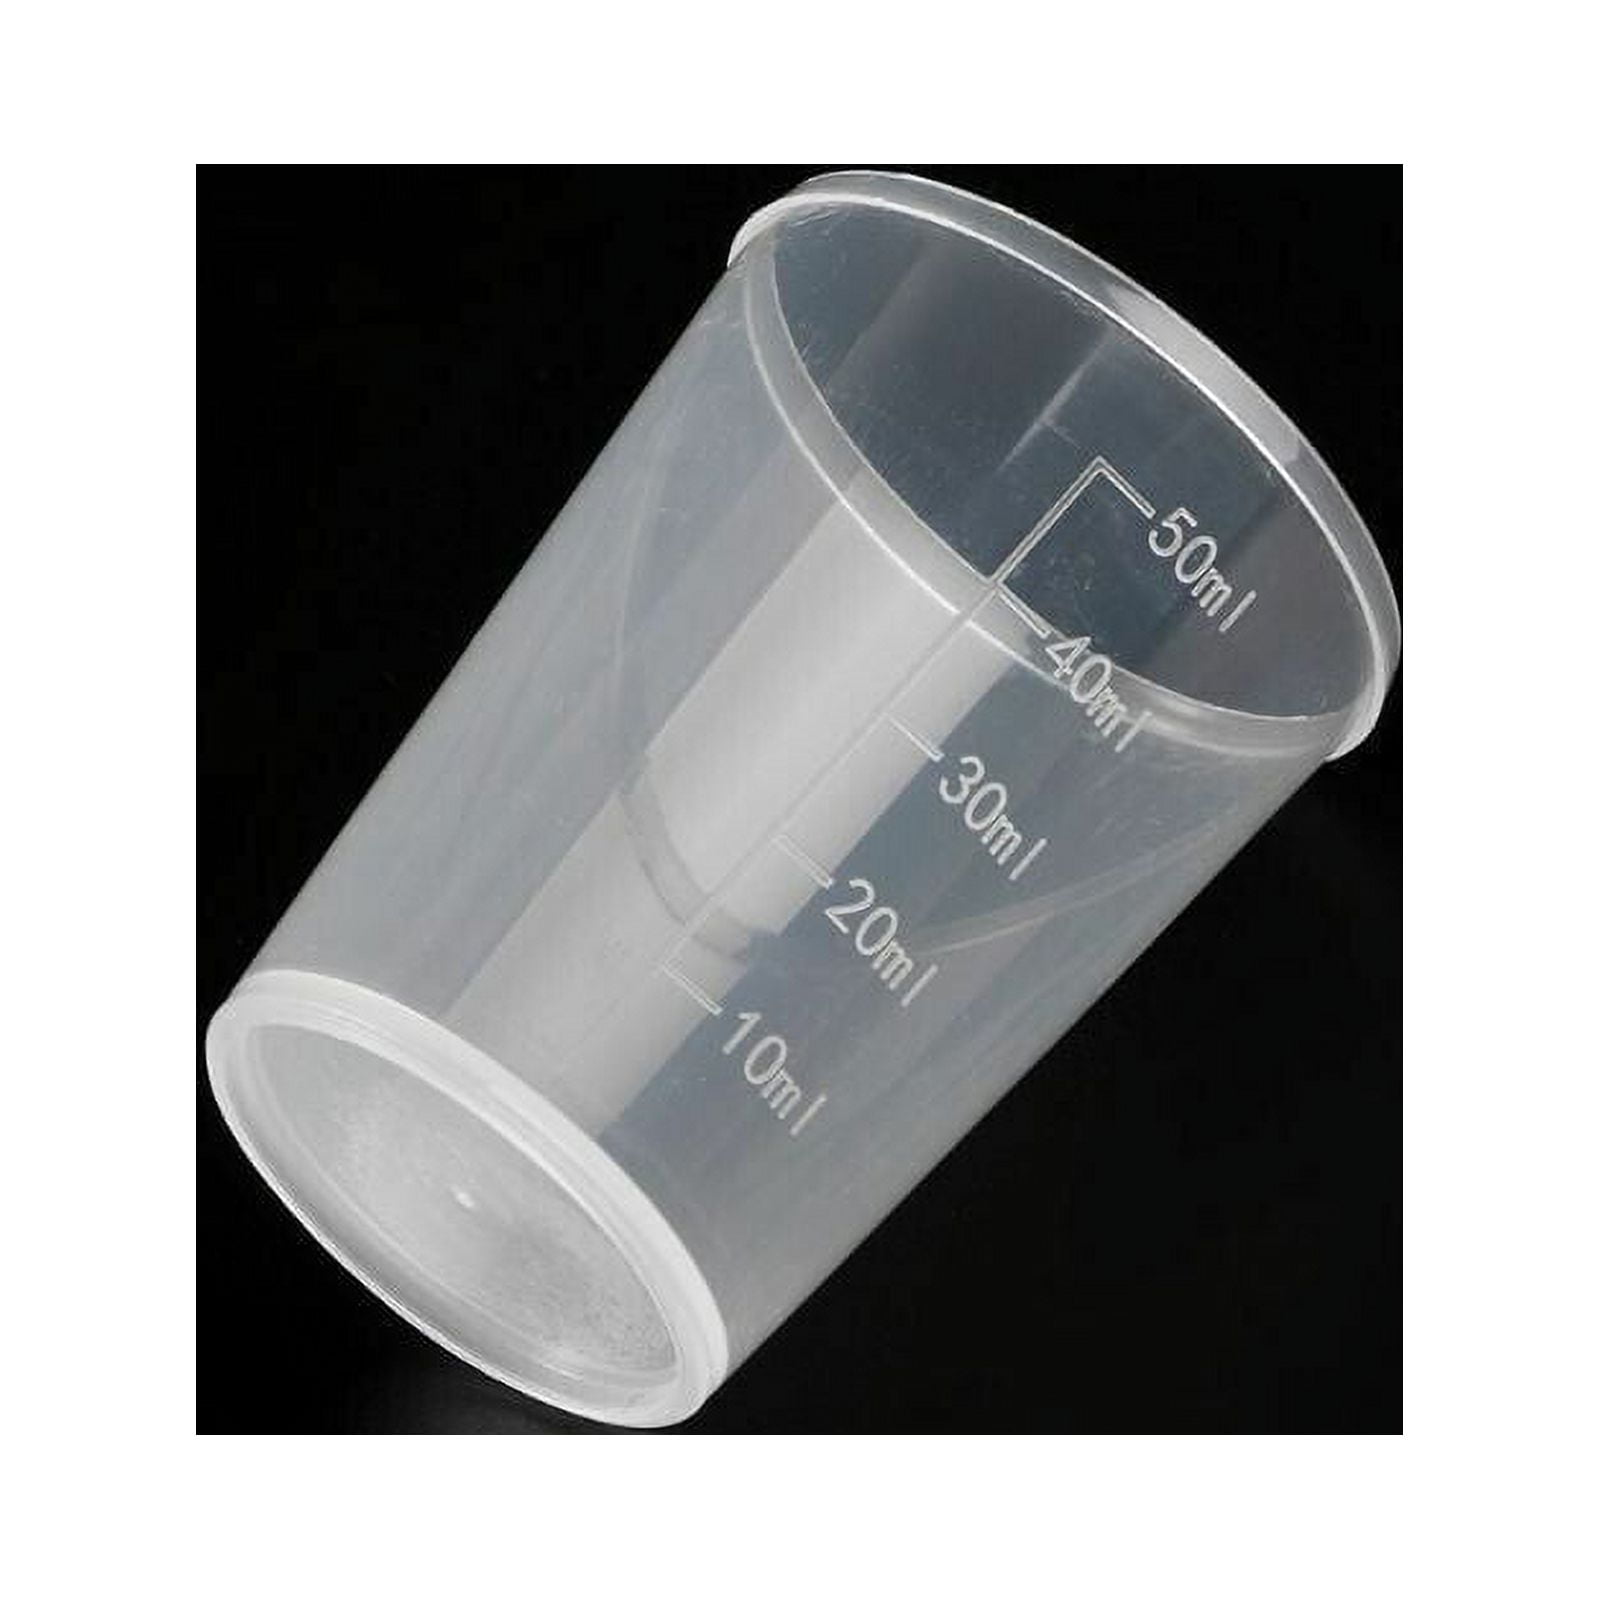 Medicine Medication Plastic Measure Guided Measuring Container Cup  20/30/50ml Pot R2T4